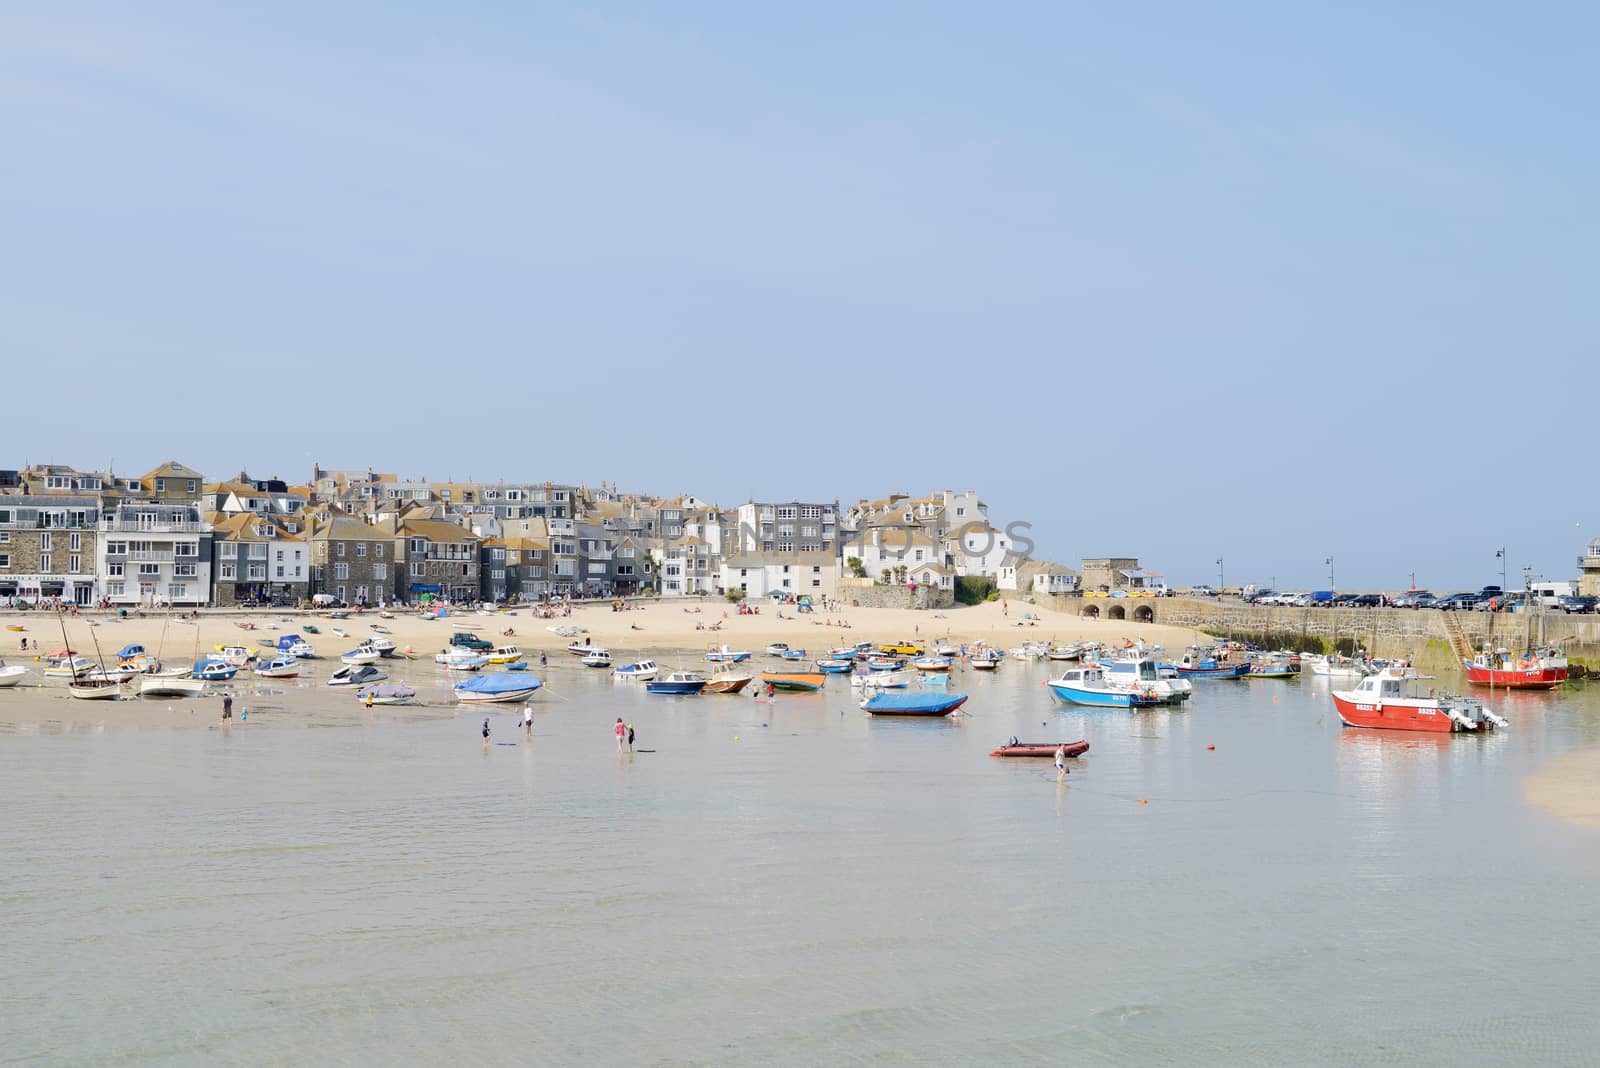 St Ives in Cornwall on a sunny day showing fishing boats in the harbour